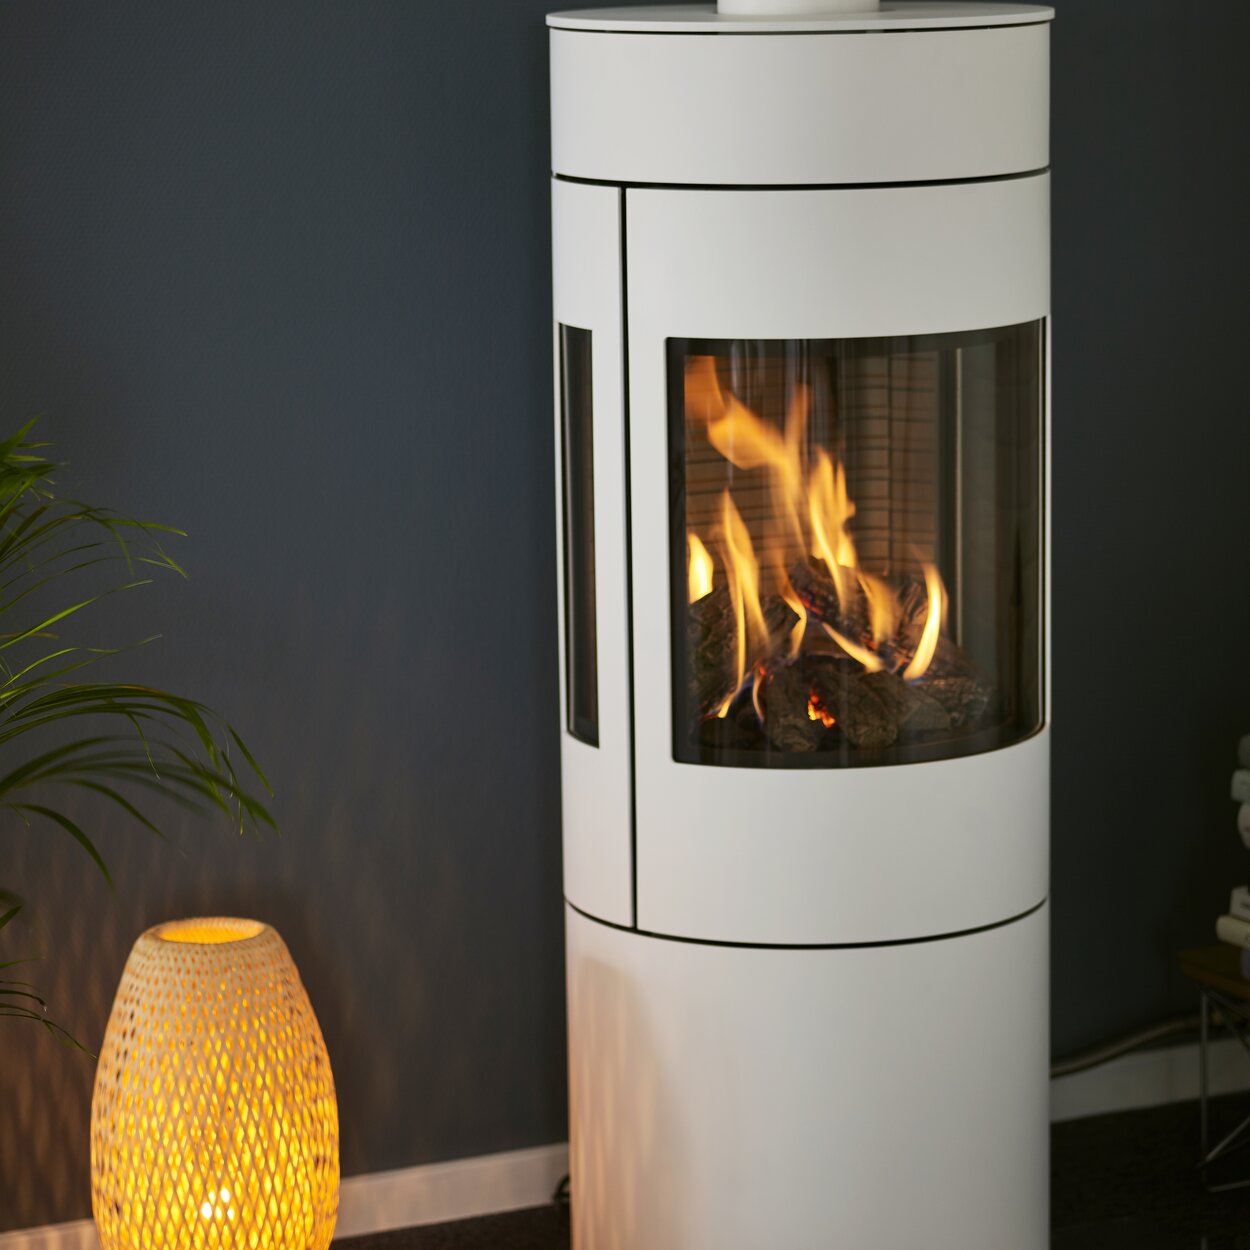 Gas stove VIVA 120 L in white with steel door and side windows in front of a dark blue wall next to a cosy floor lamp